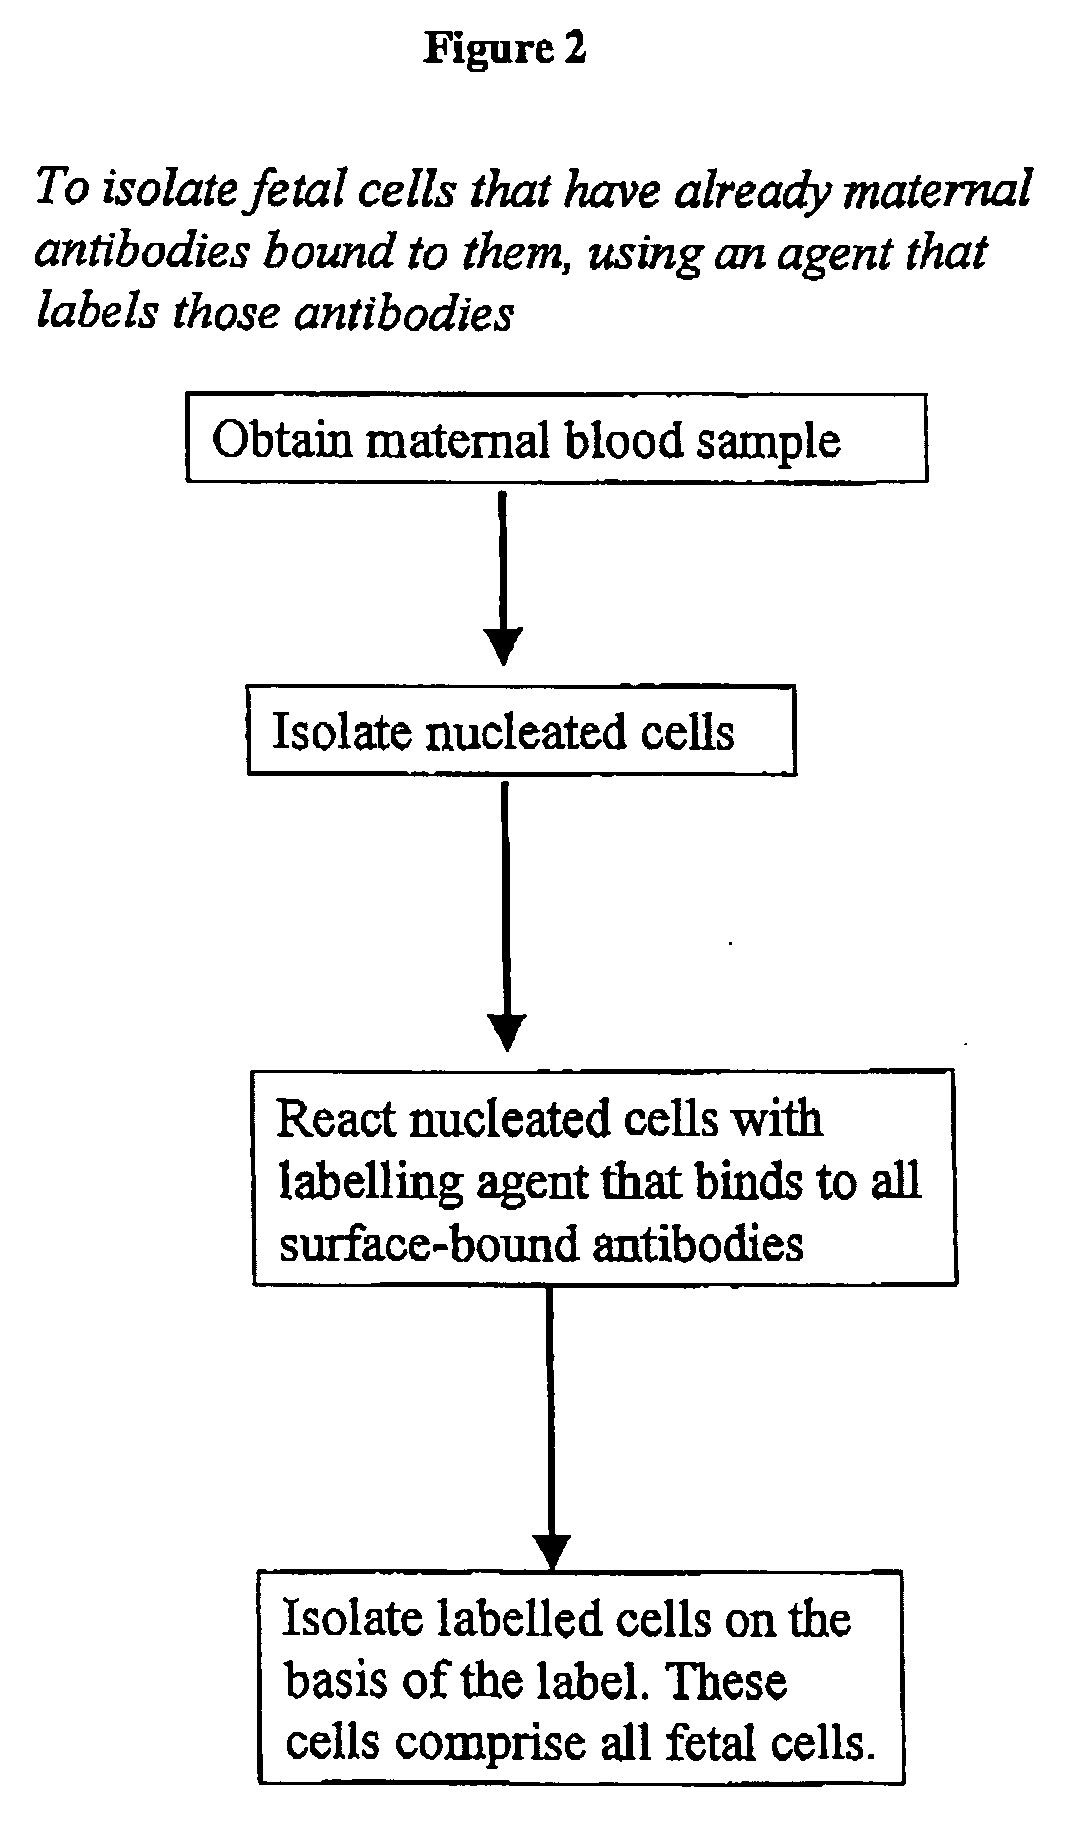 Maternal antibodies as fetal cell markers to identify and enrich fetal cells from maternal blood